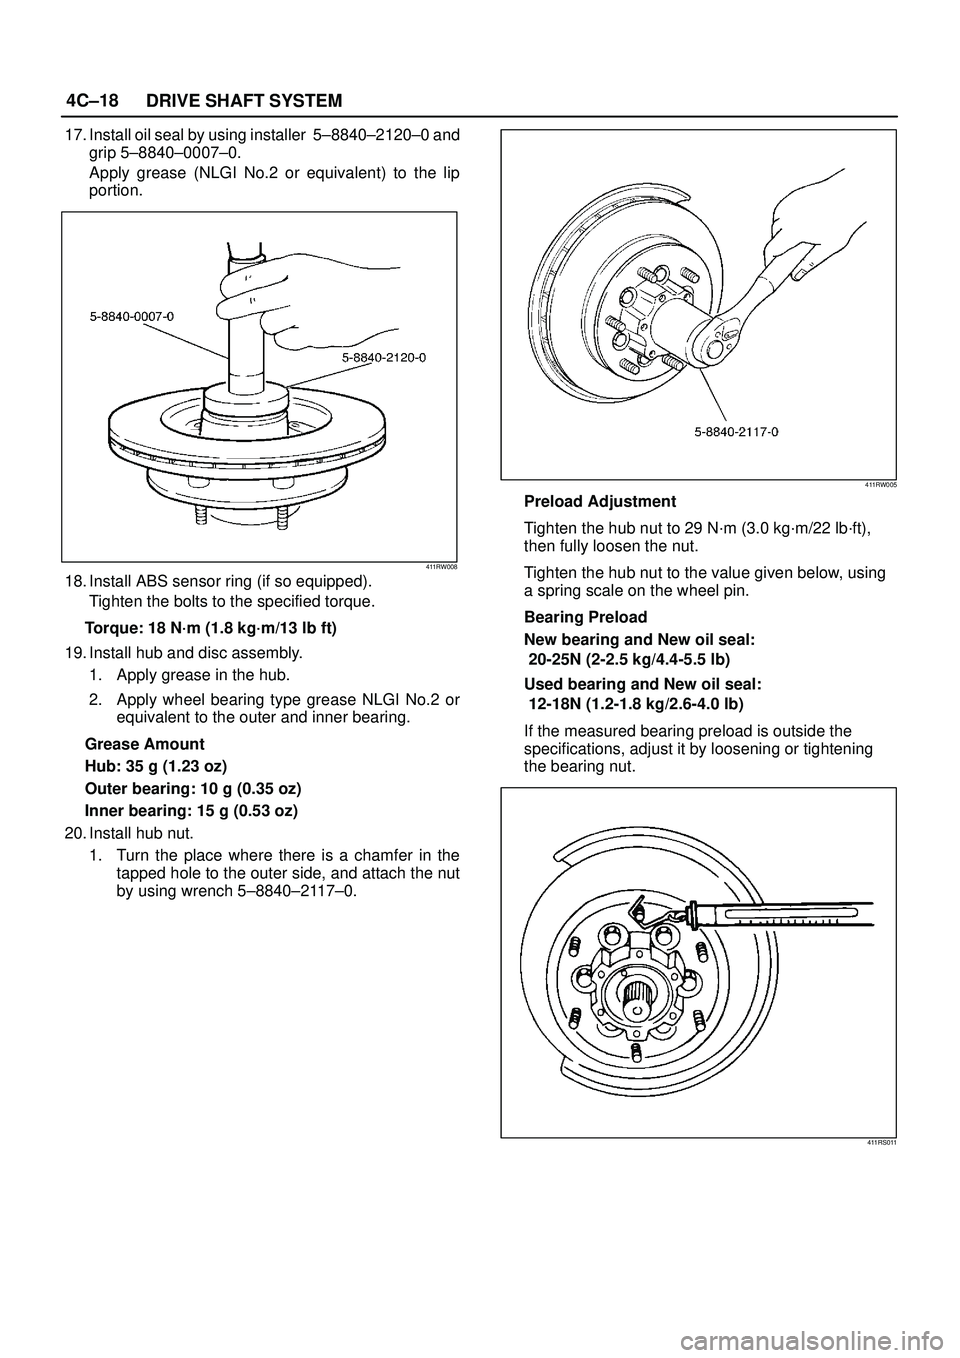 ISUZU TROOPER 1998  Service Owners Manual 4C±18
DRIVE SHAFT SYSTEM
17. Install oil seal by using installer  5±8840±2120±0 and
grip 5±8840±0007±0.
Apply grease (NLGI No.2 or equivalent) to the lip
portion.
411RW008
18. Install ABS senso